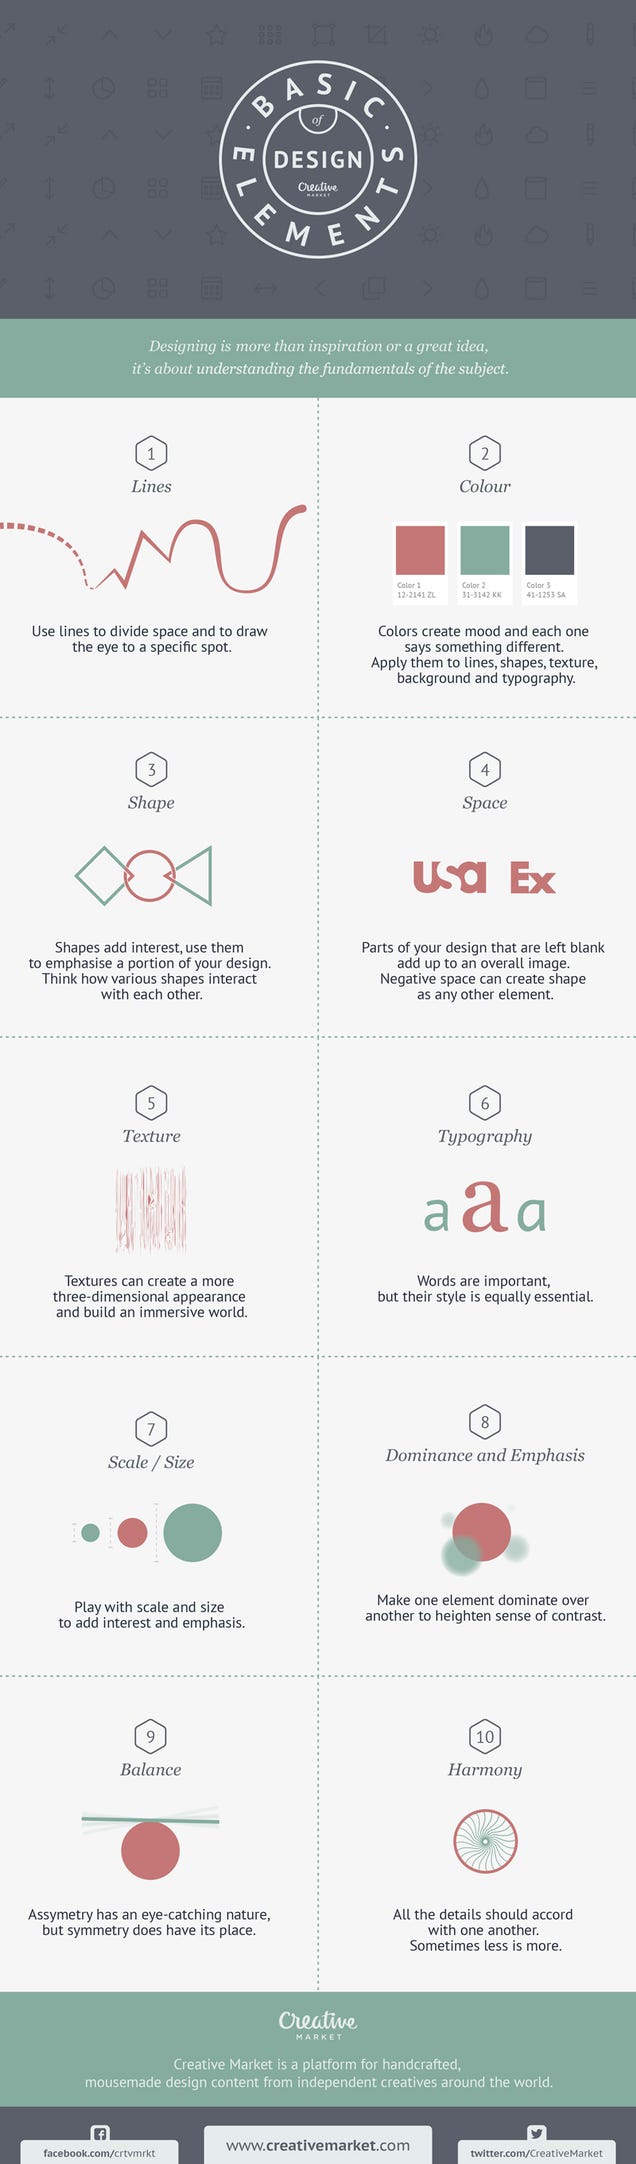 This Graphic Teaches You the Basic Elements of Good Design